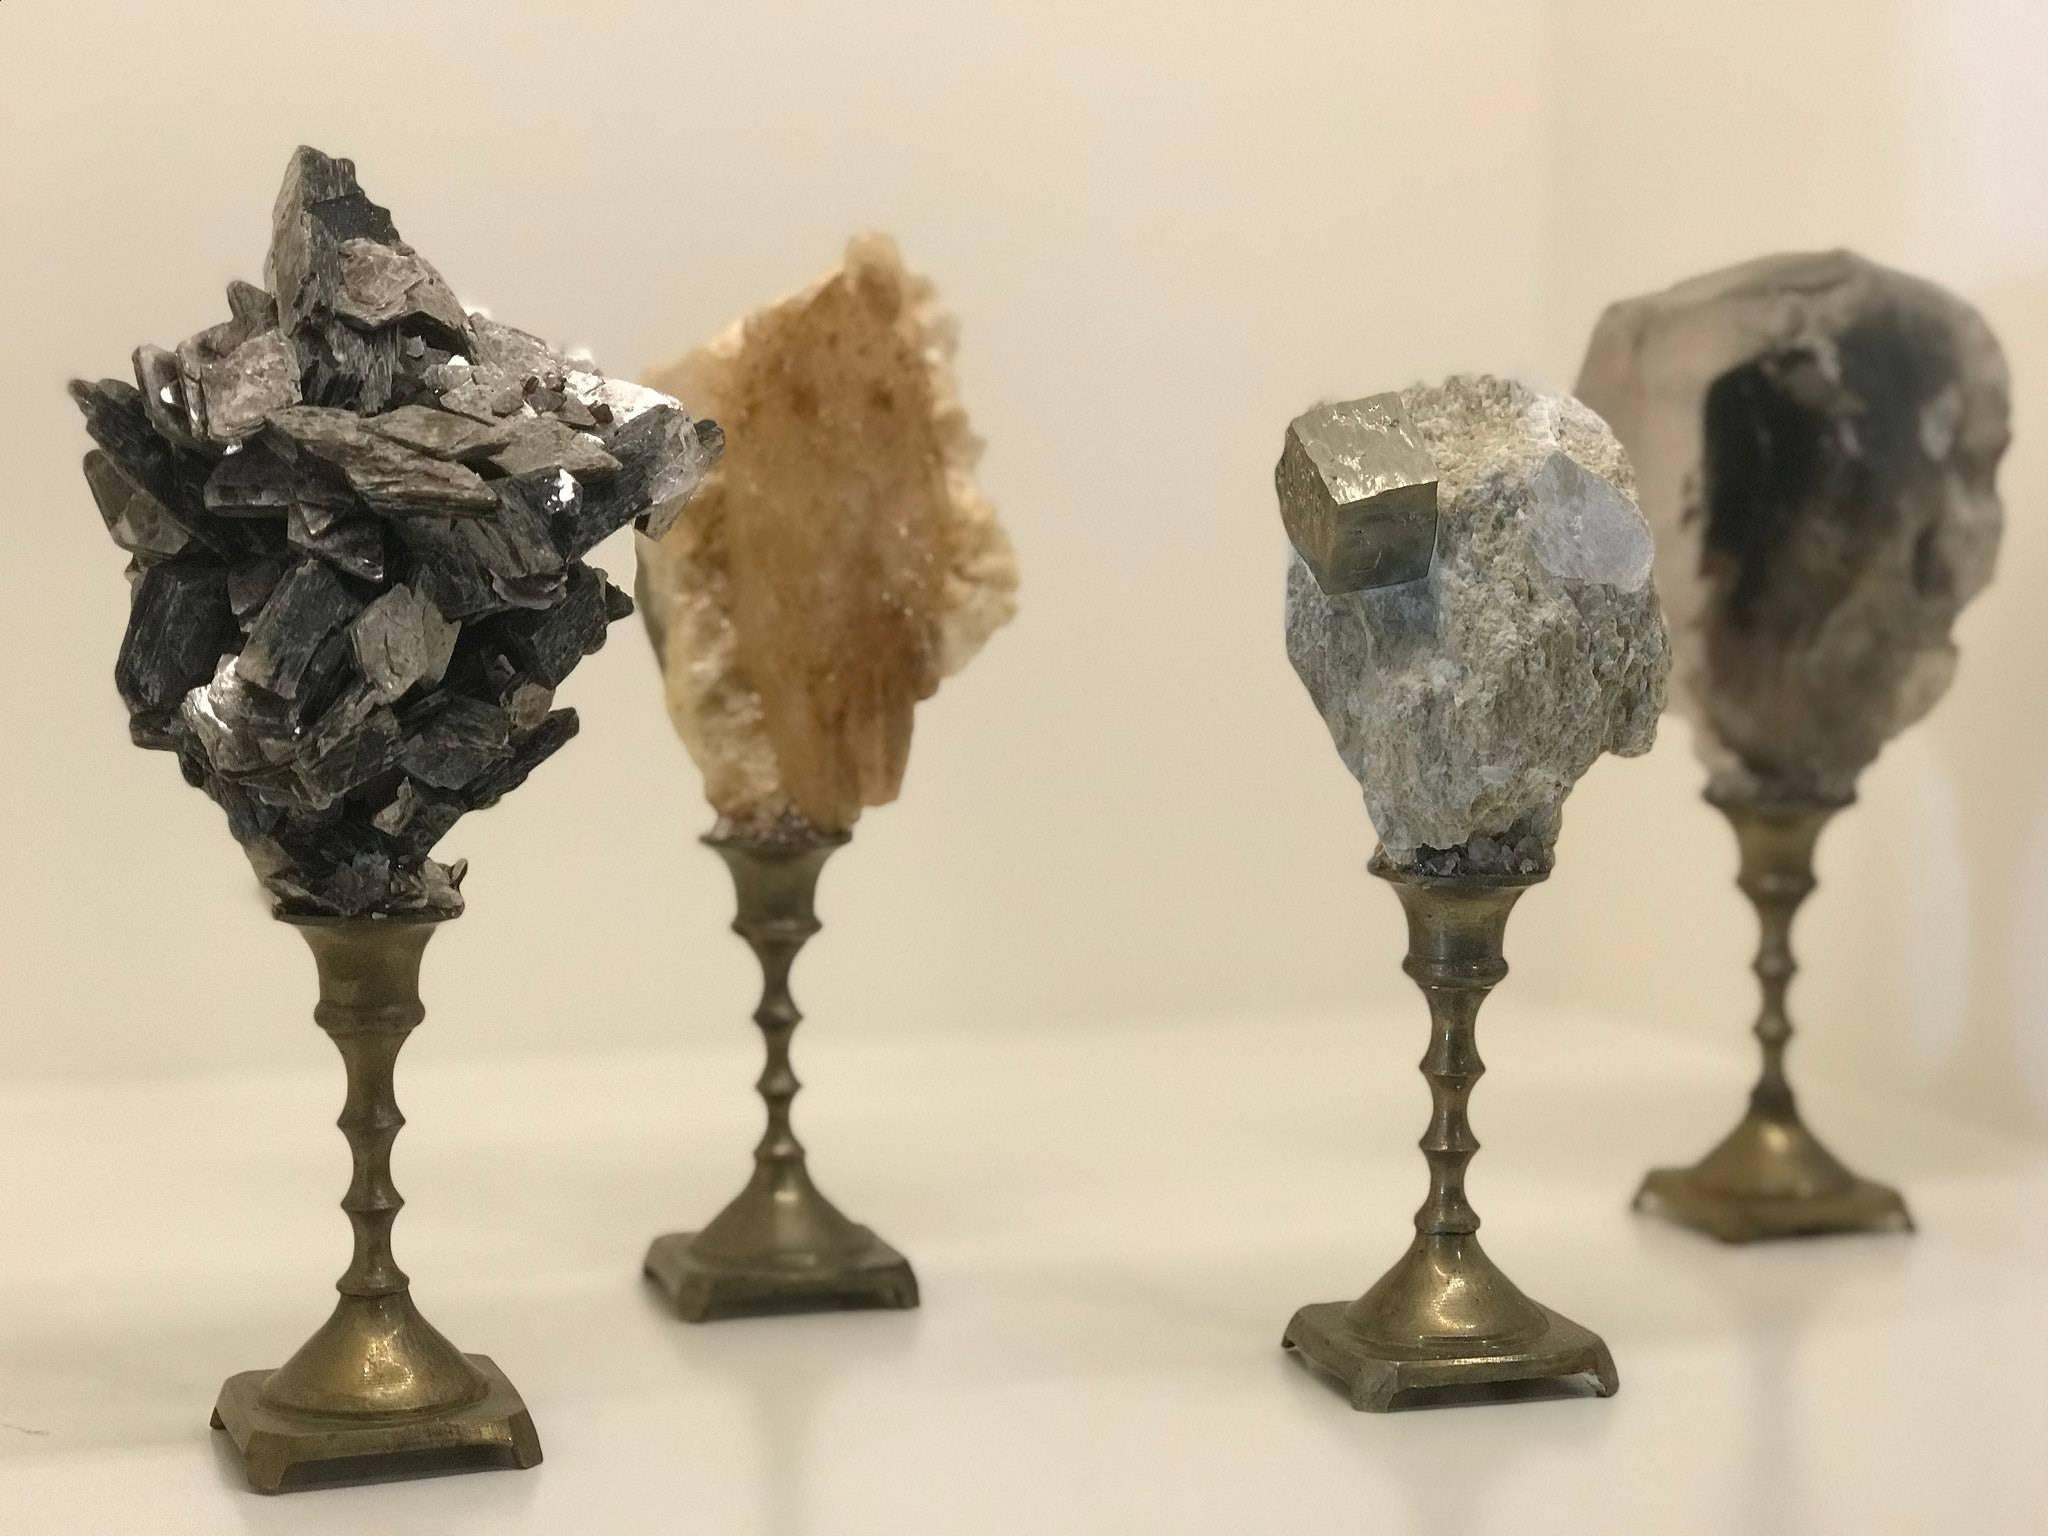 A handsome display of earth’s most breathtaking examples of natural history that have formed over the past 450 million years. Four natural mineral specimens collected from around the world are mounted on vintage brass bases.
A wonderful set to add